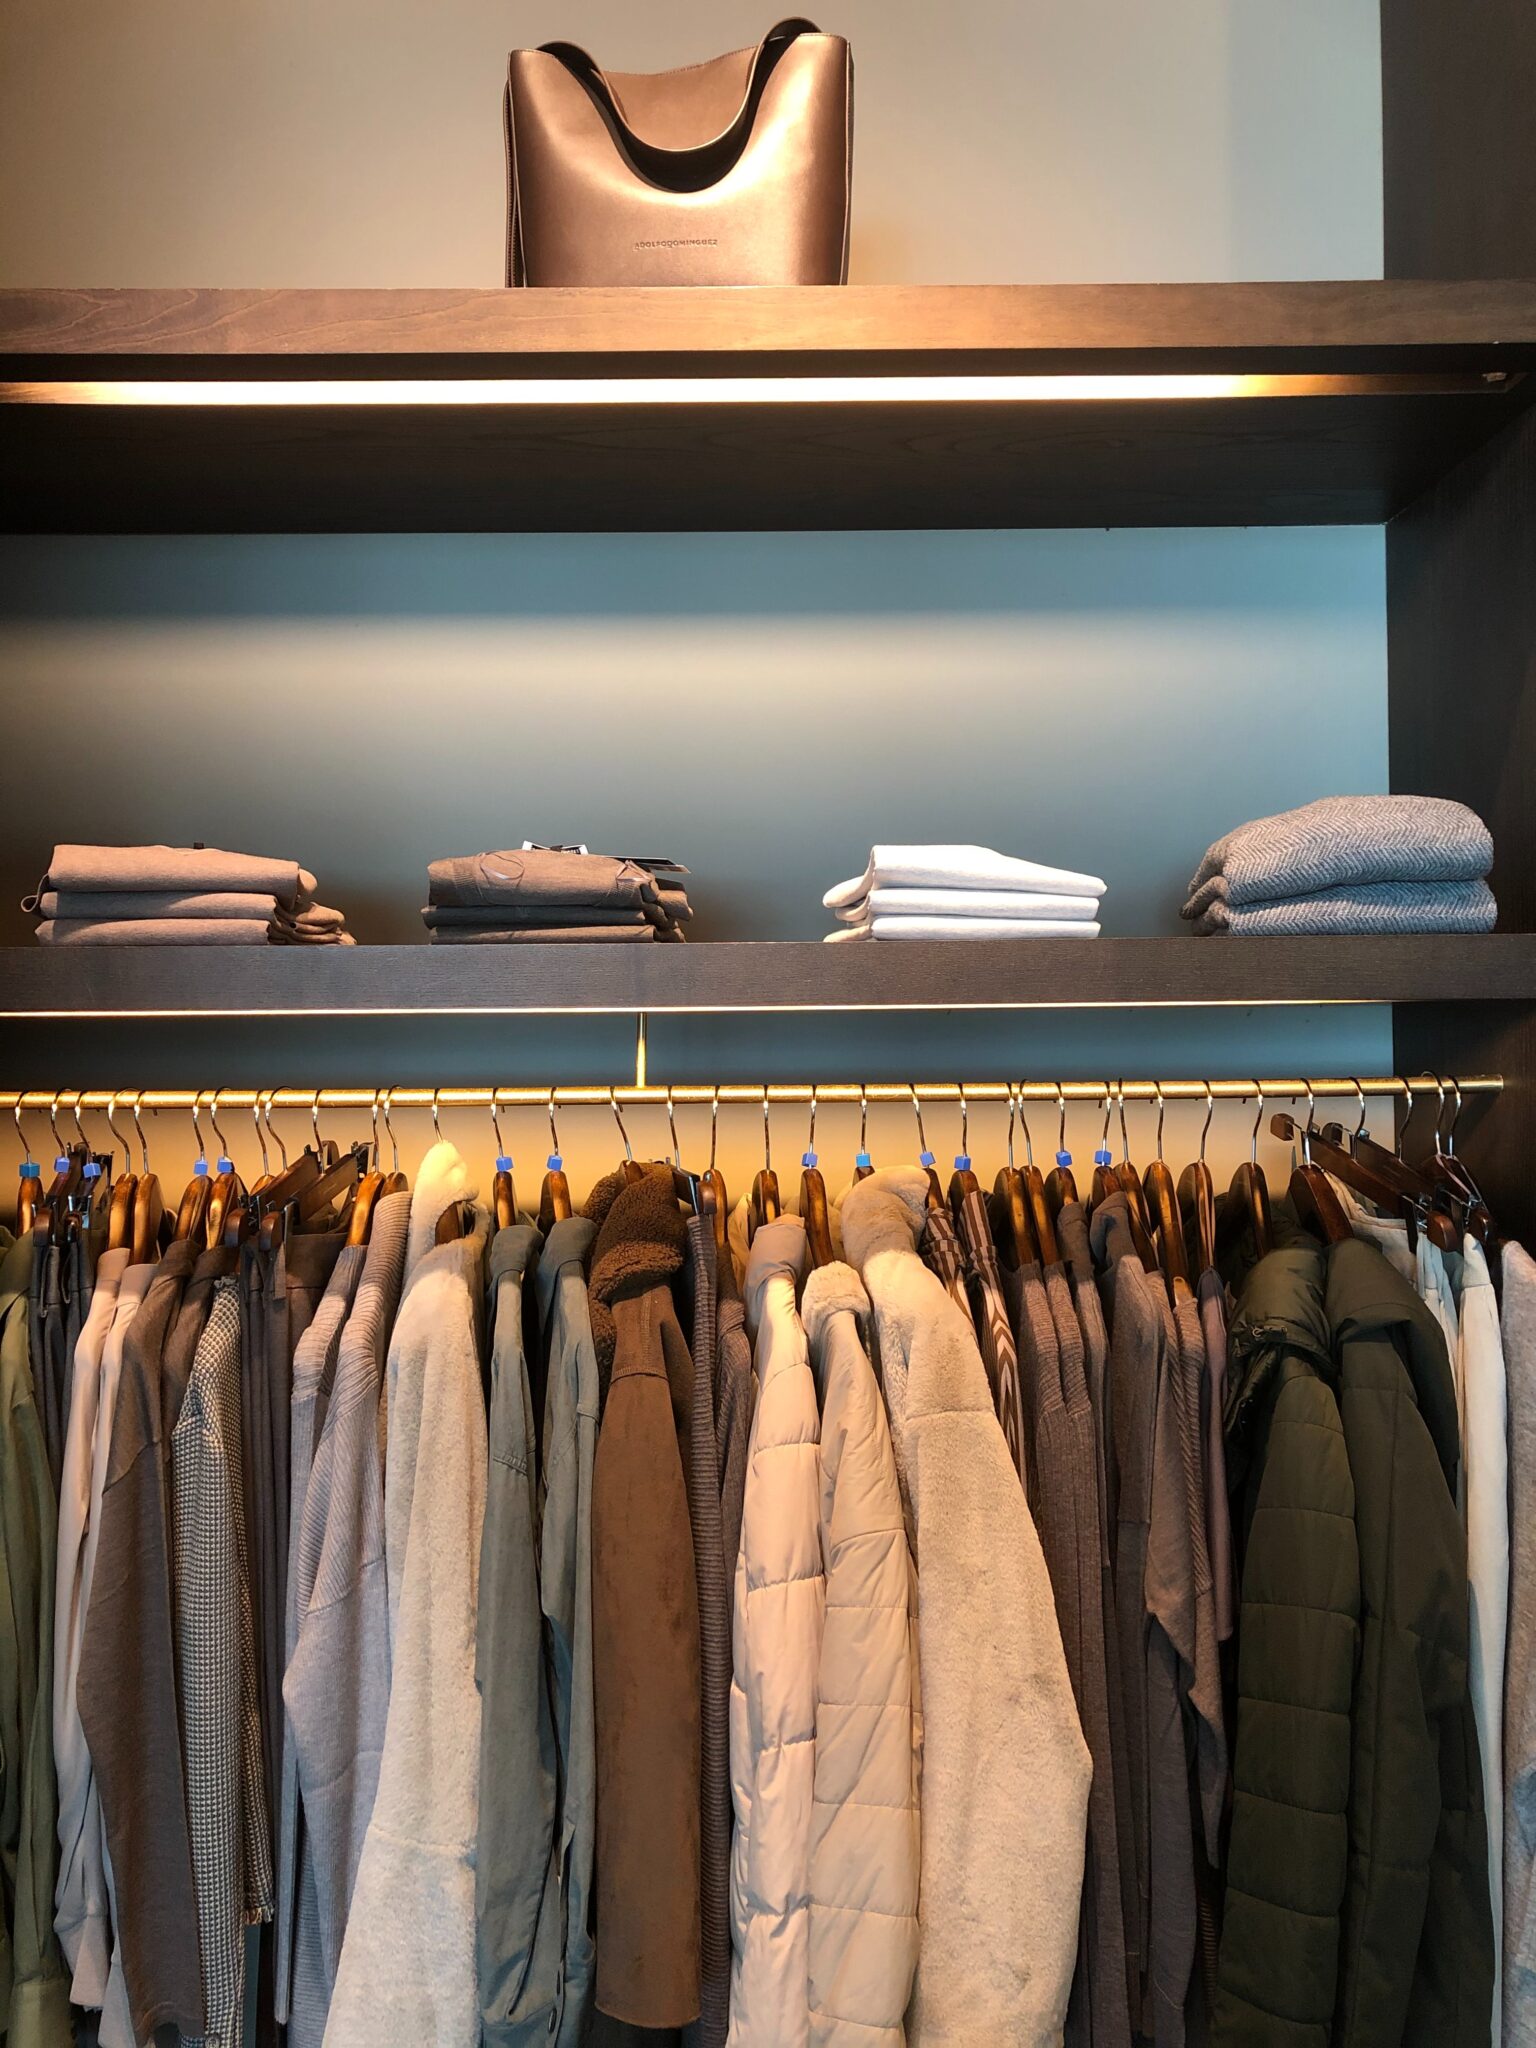 Essential Steps to Choosing the Perfect Bedroom Wardrobe